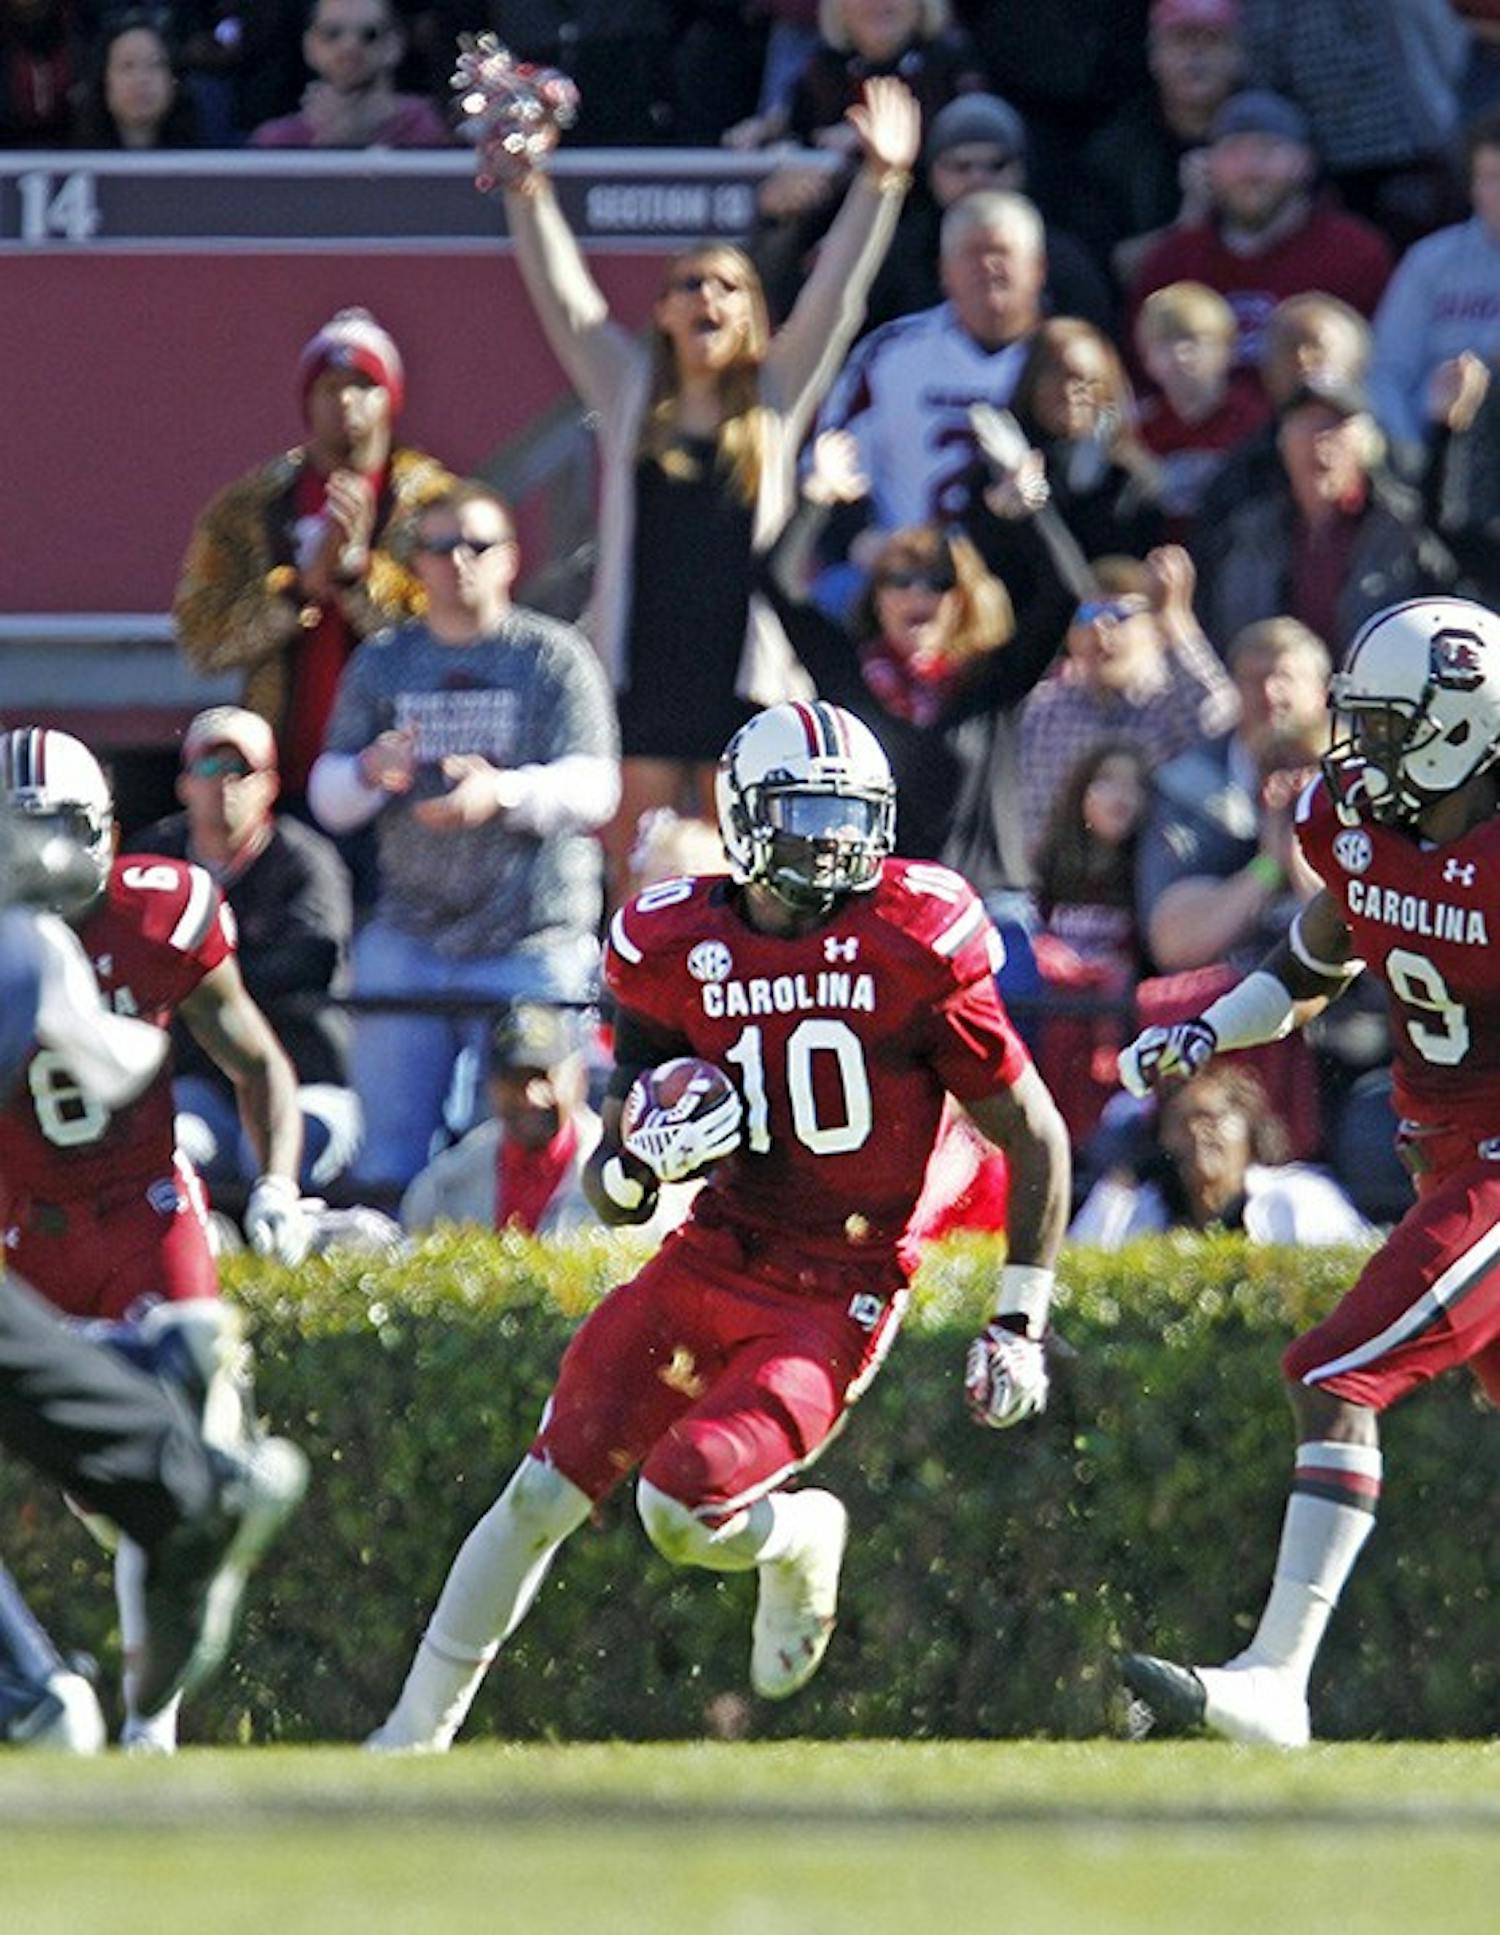 South Carolina linebacker Skai Moore (10) returns an interception in the first half against South Alabama at Williams-Brice Stadium in Columbia, S.C., on Saturday, Nov. 22, 2014. The host Gamecocks won, 37-12. (Gerry Melendez/The State/TNS)